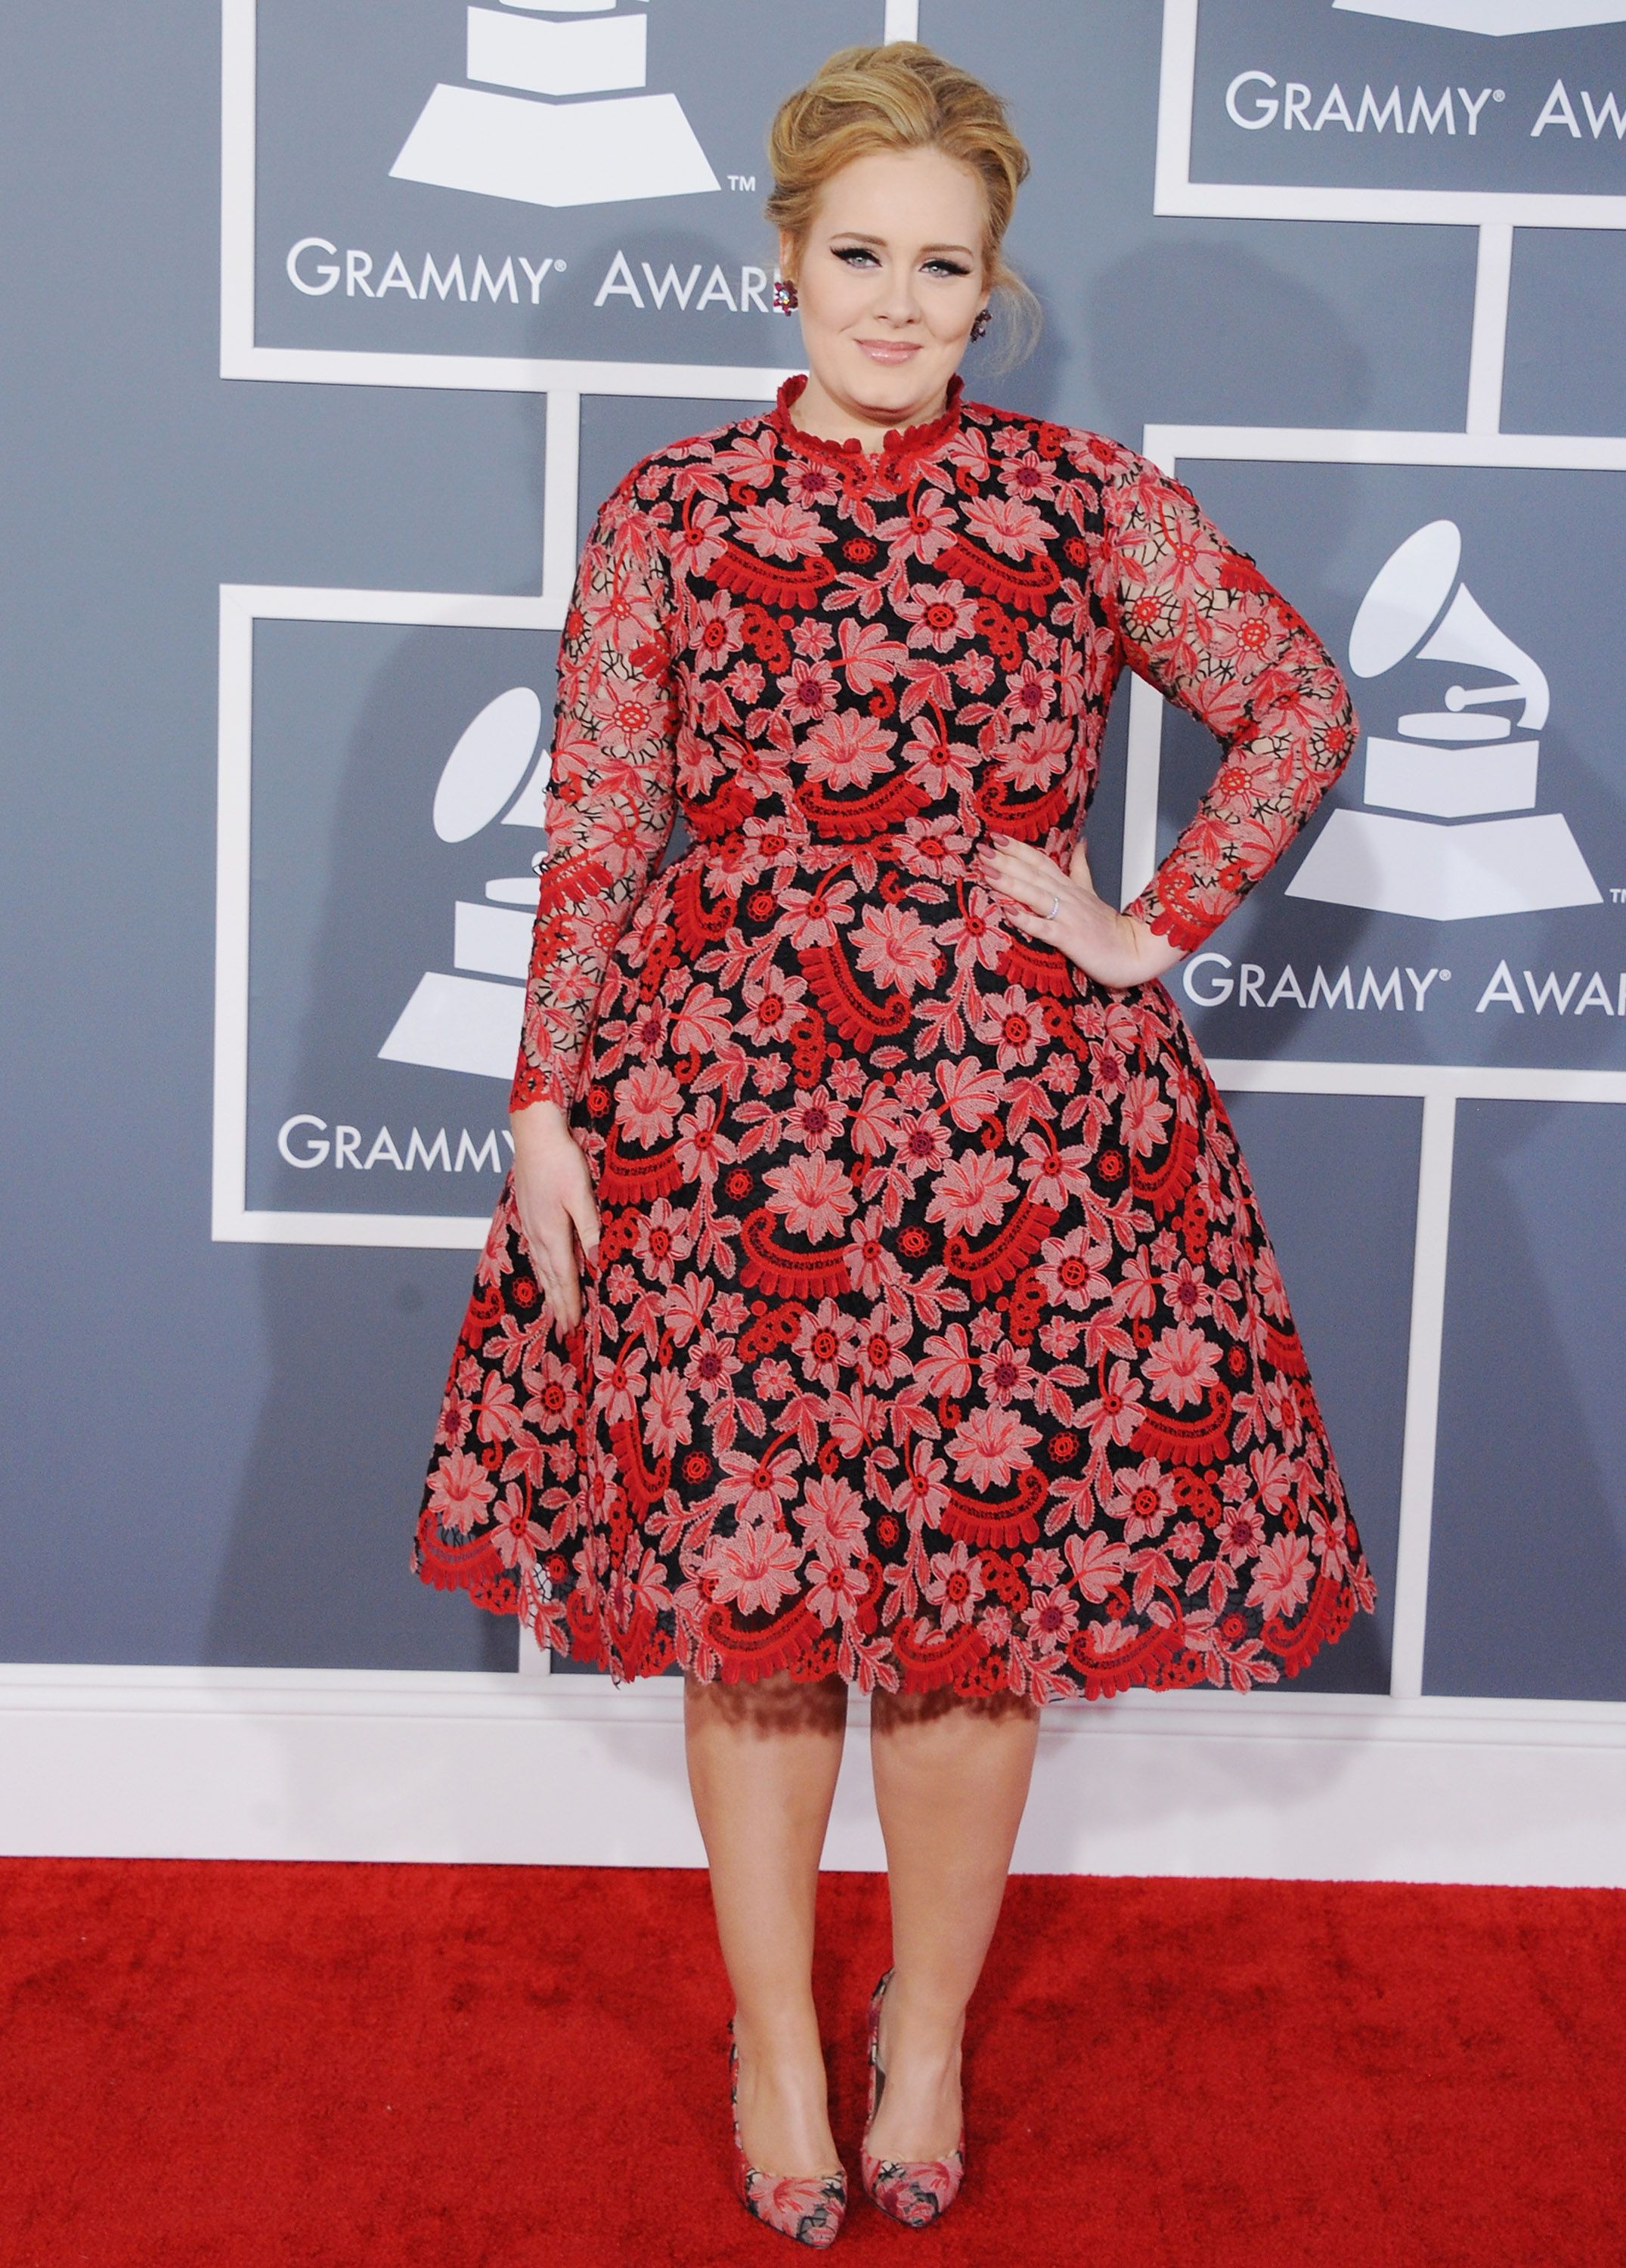 Adele's best fashion and style | Red carpet dresses